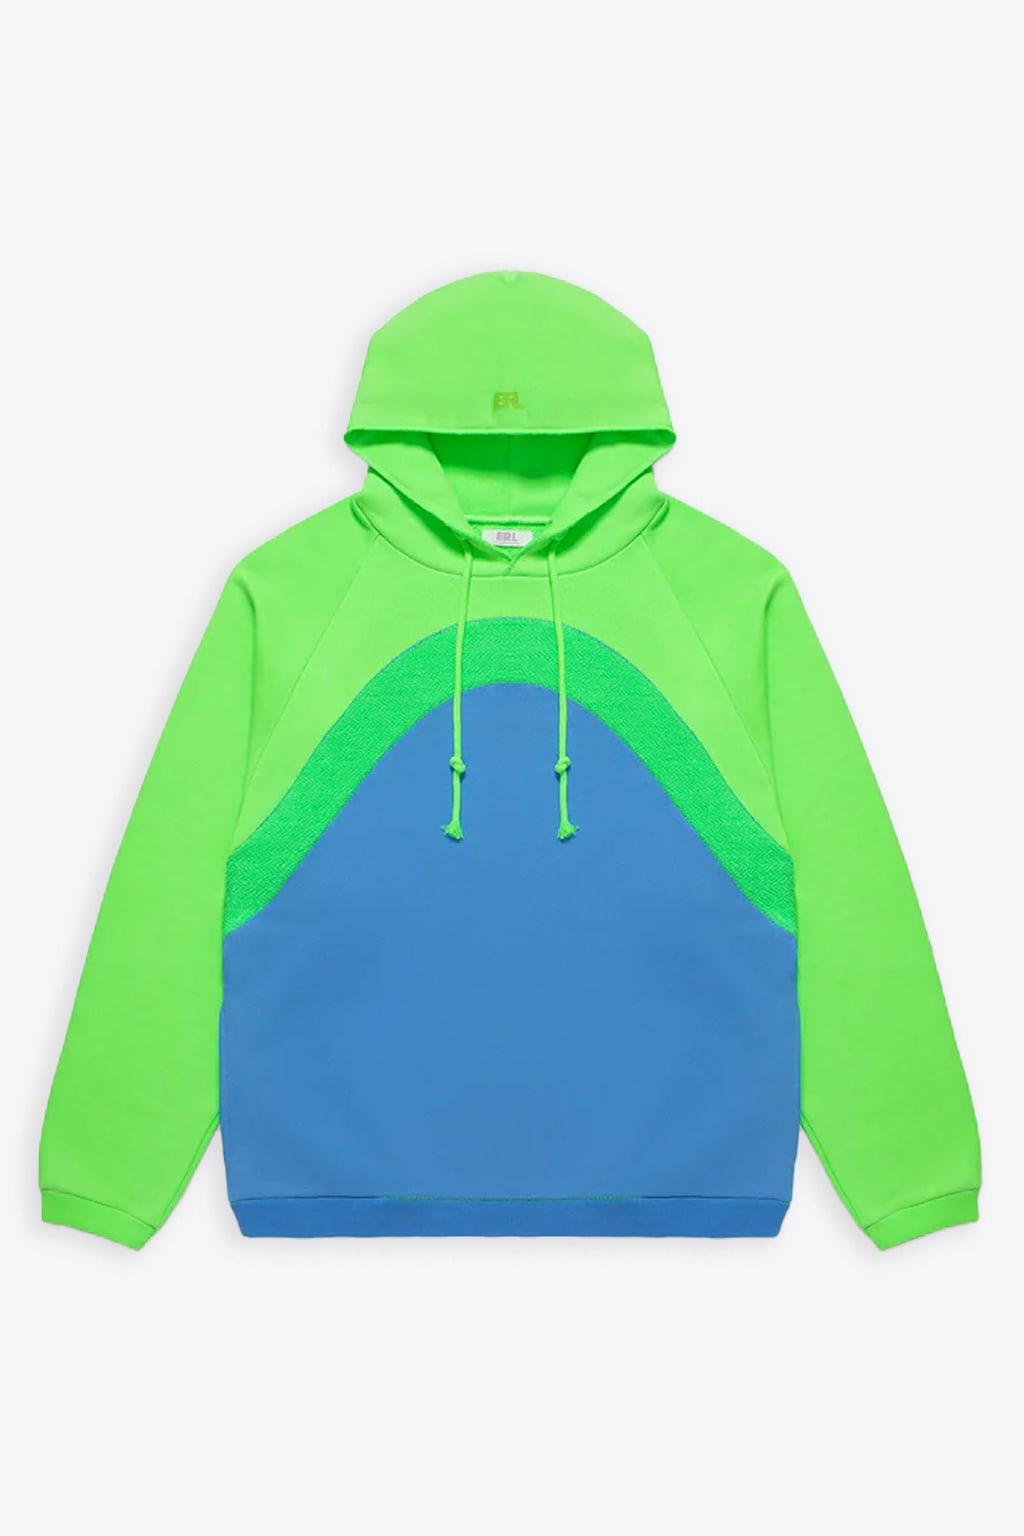 ERL Raimbow Hoodie Knit Green And Blue Cotton Hoodie   Rainbow